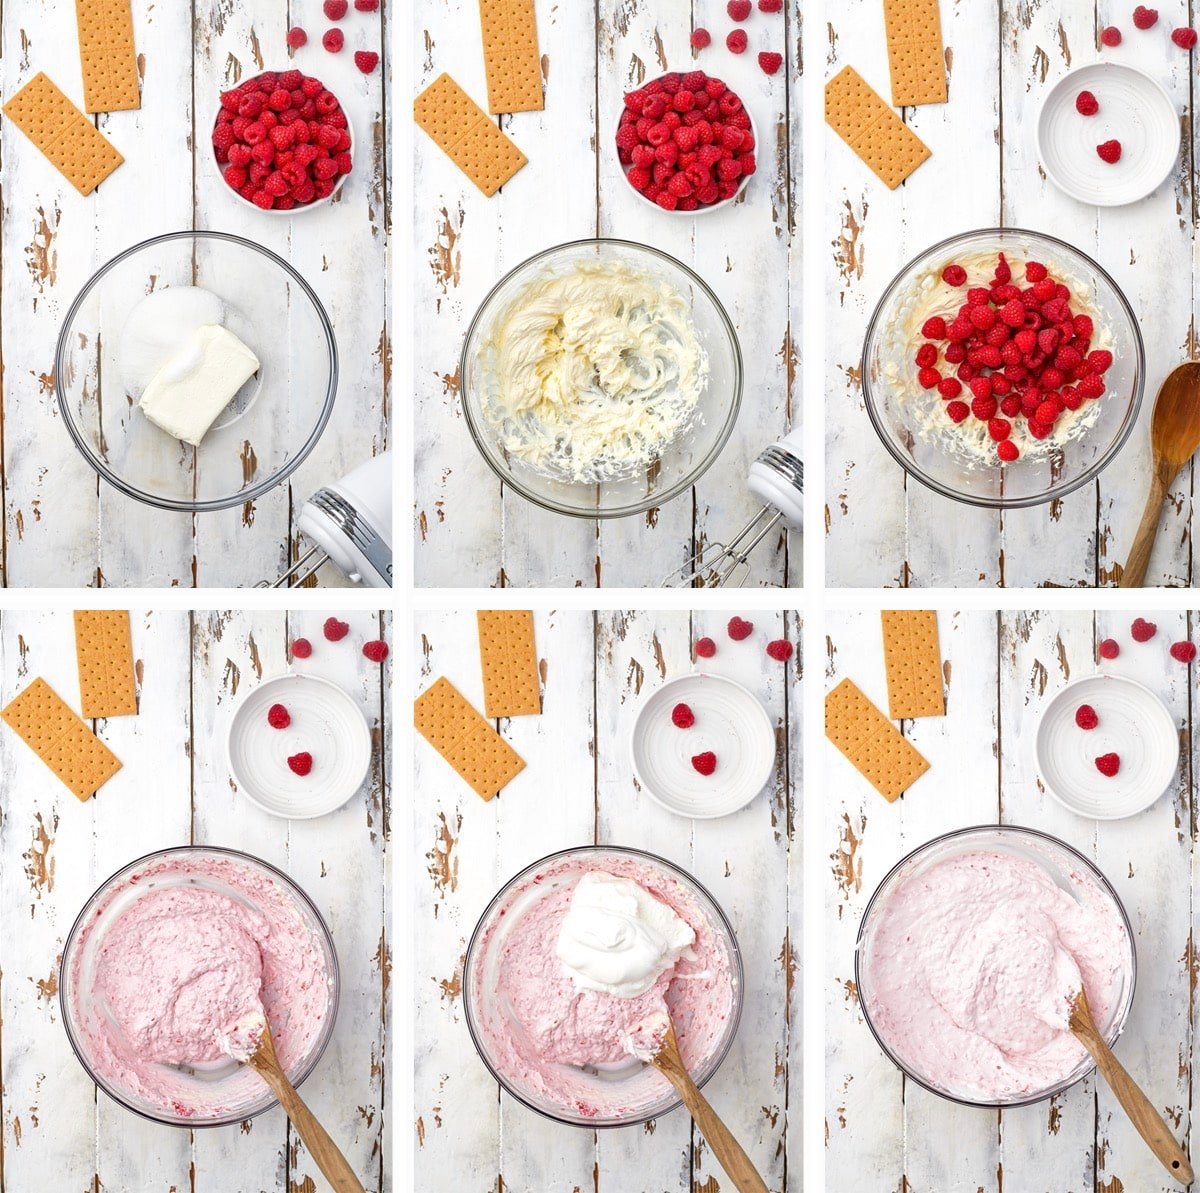 Overhead collage of images showing how to make the filling for no bake cheesecake bites